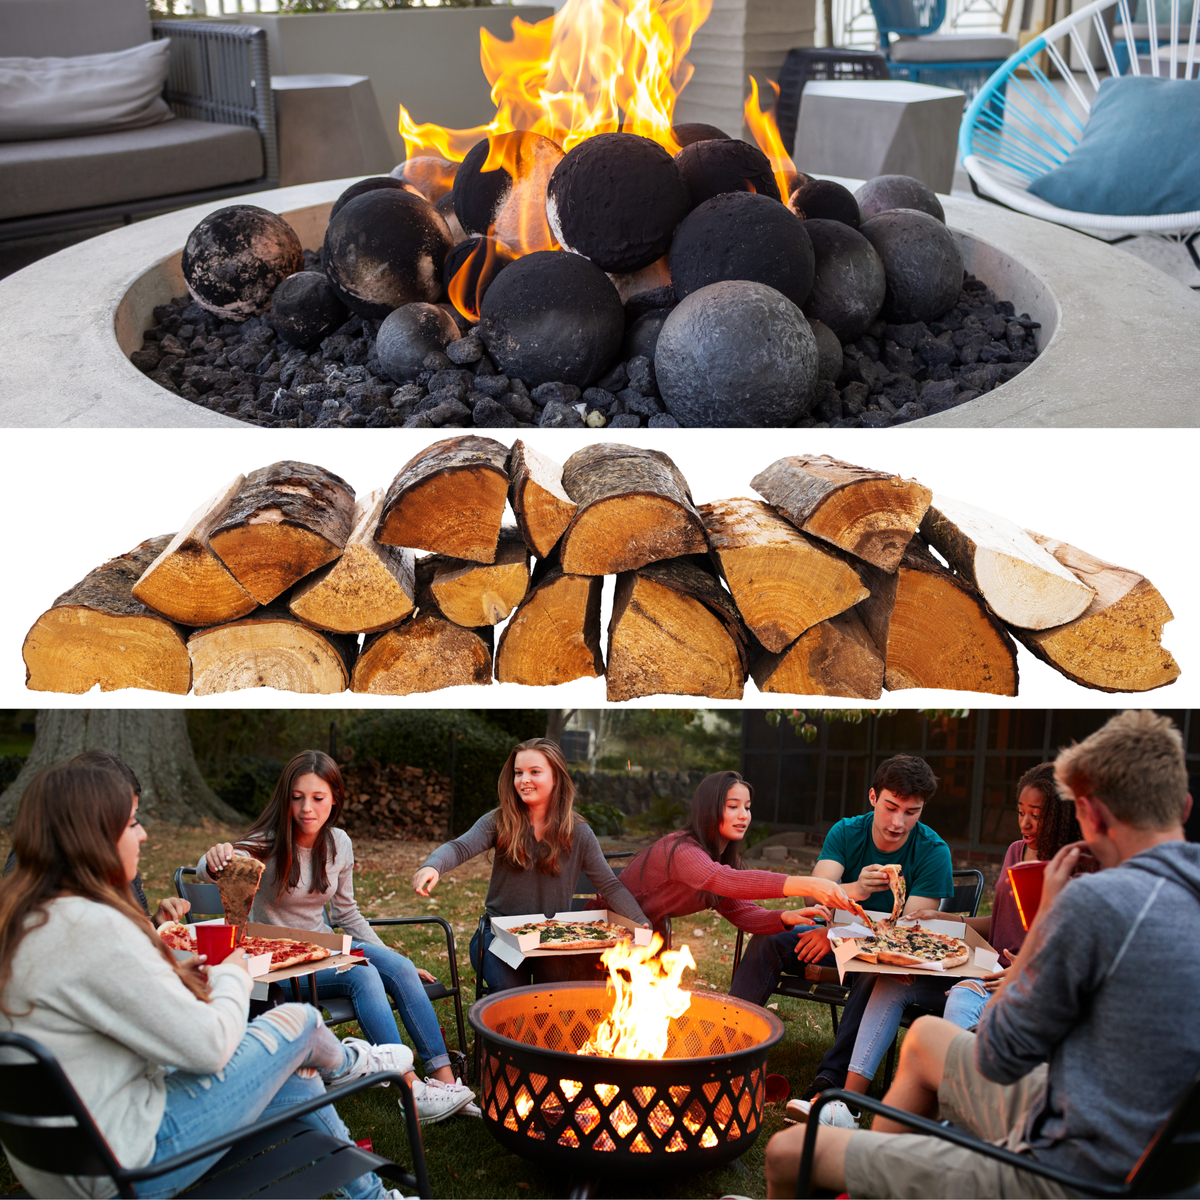 Propane Fire Pit, Wood Stack, Wood Burning Fire Pit with friends.